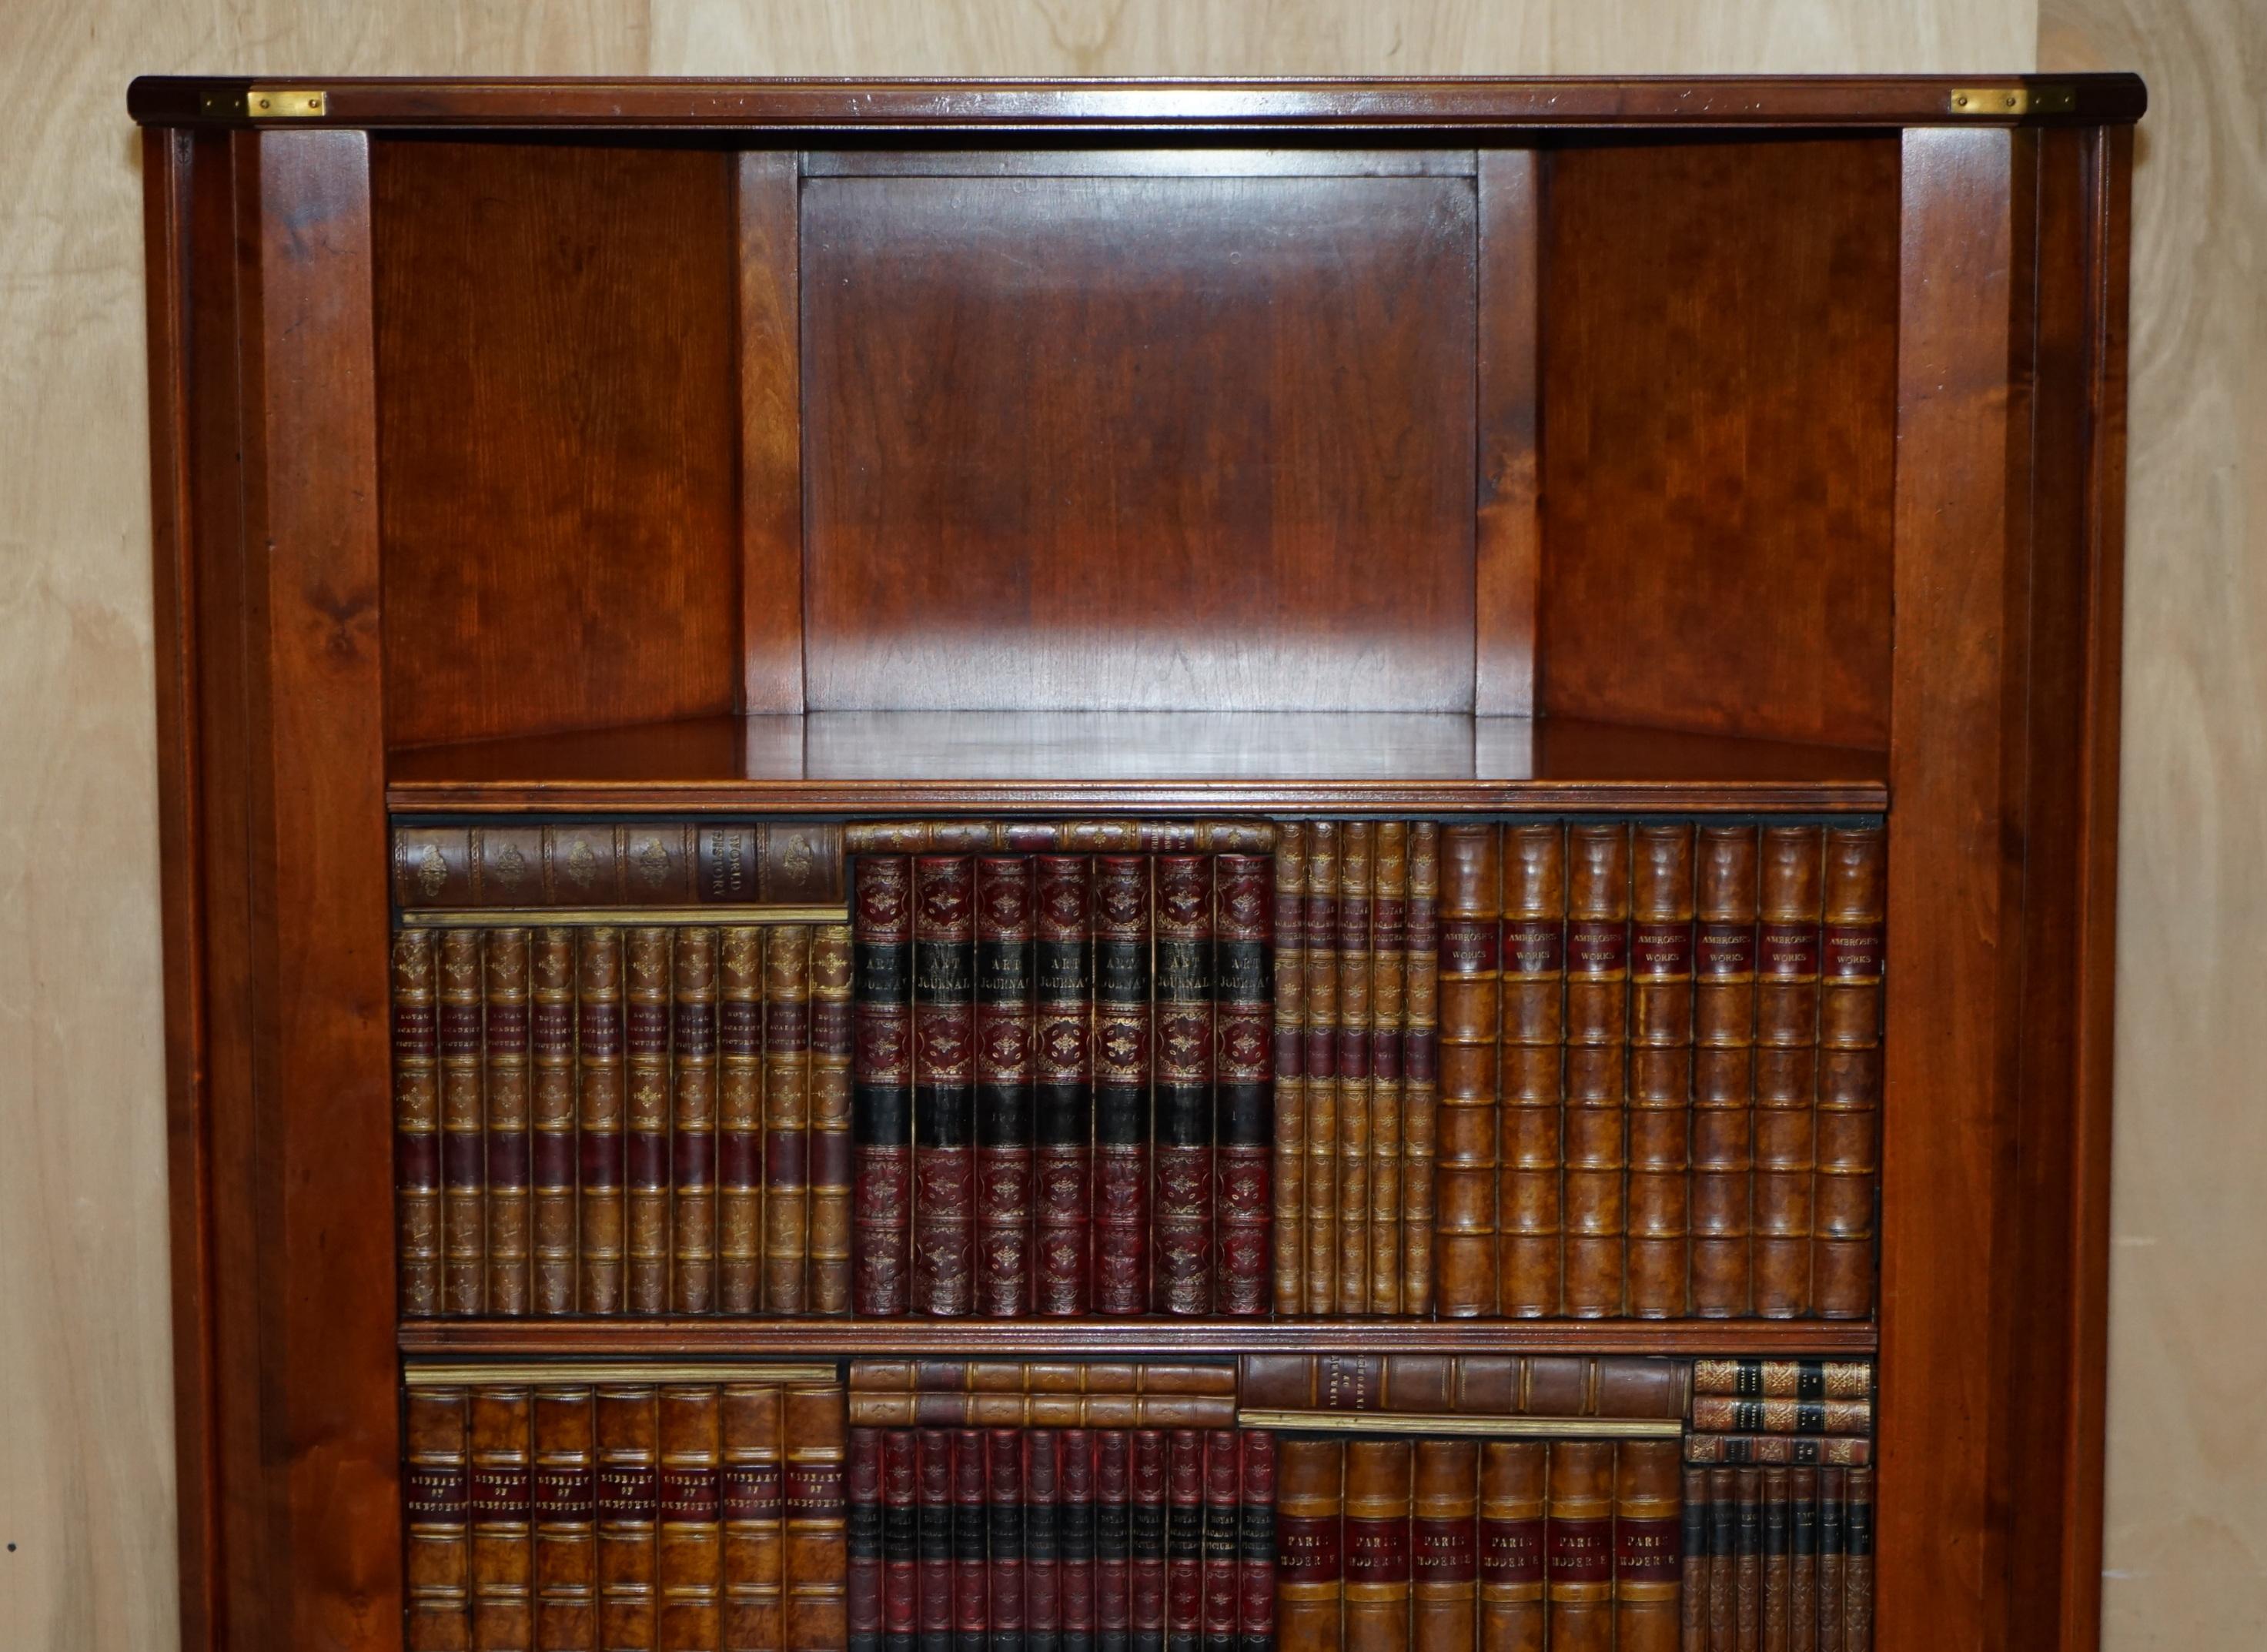 Campaign 1 of 2 Harrods London Kennedy Hardwood Bookcase Home Bar Cabinet Faux Books For Sale